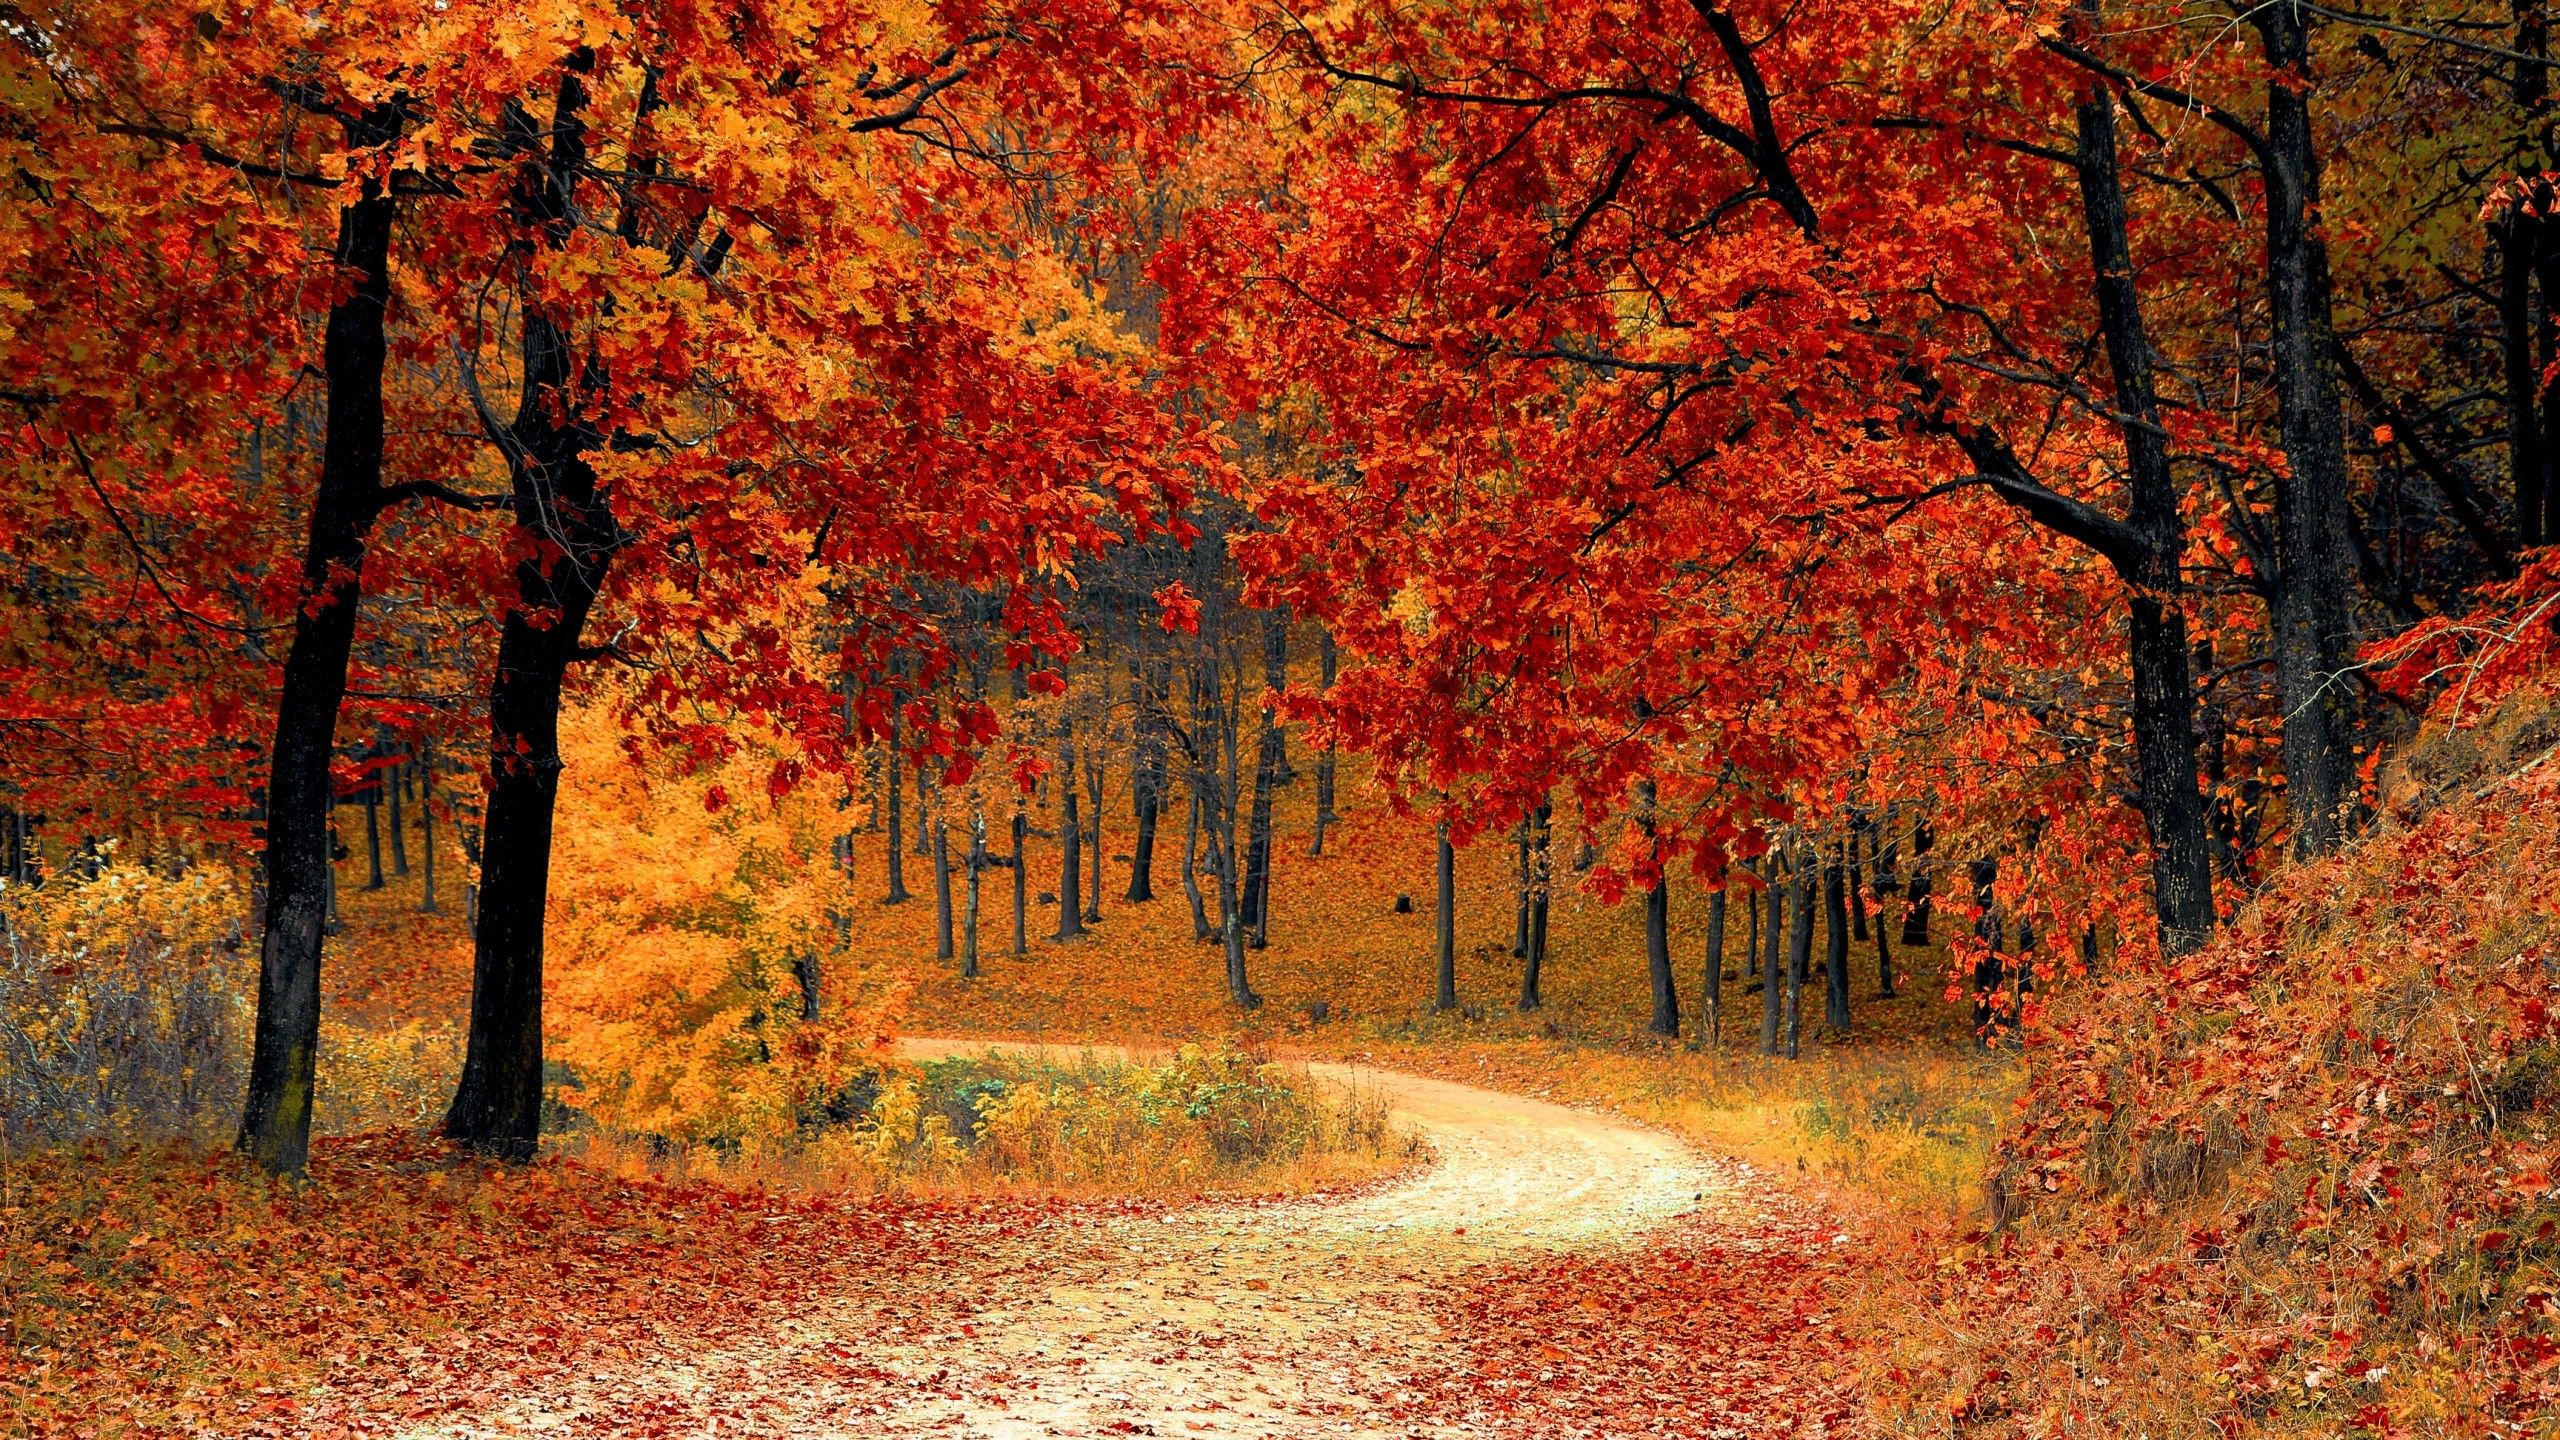 Autumn 4K Wallpaper, Red leaves, Forest, Pathway, Scenery, Fall, Trees, Nature